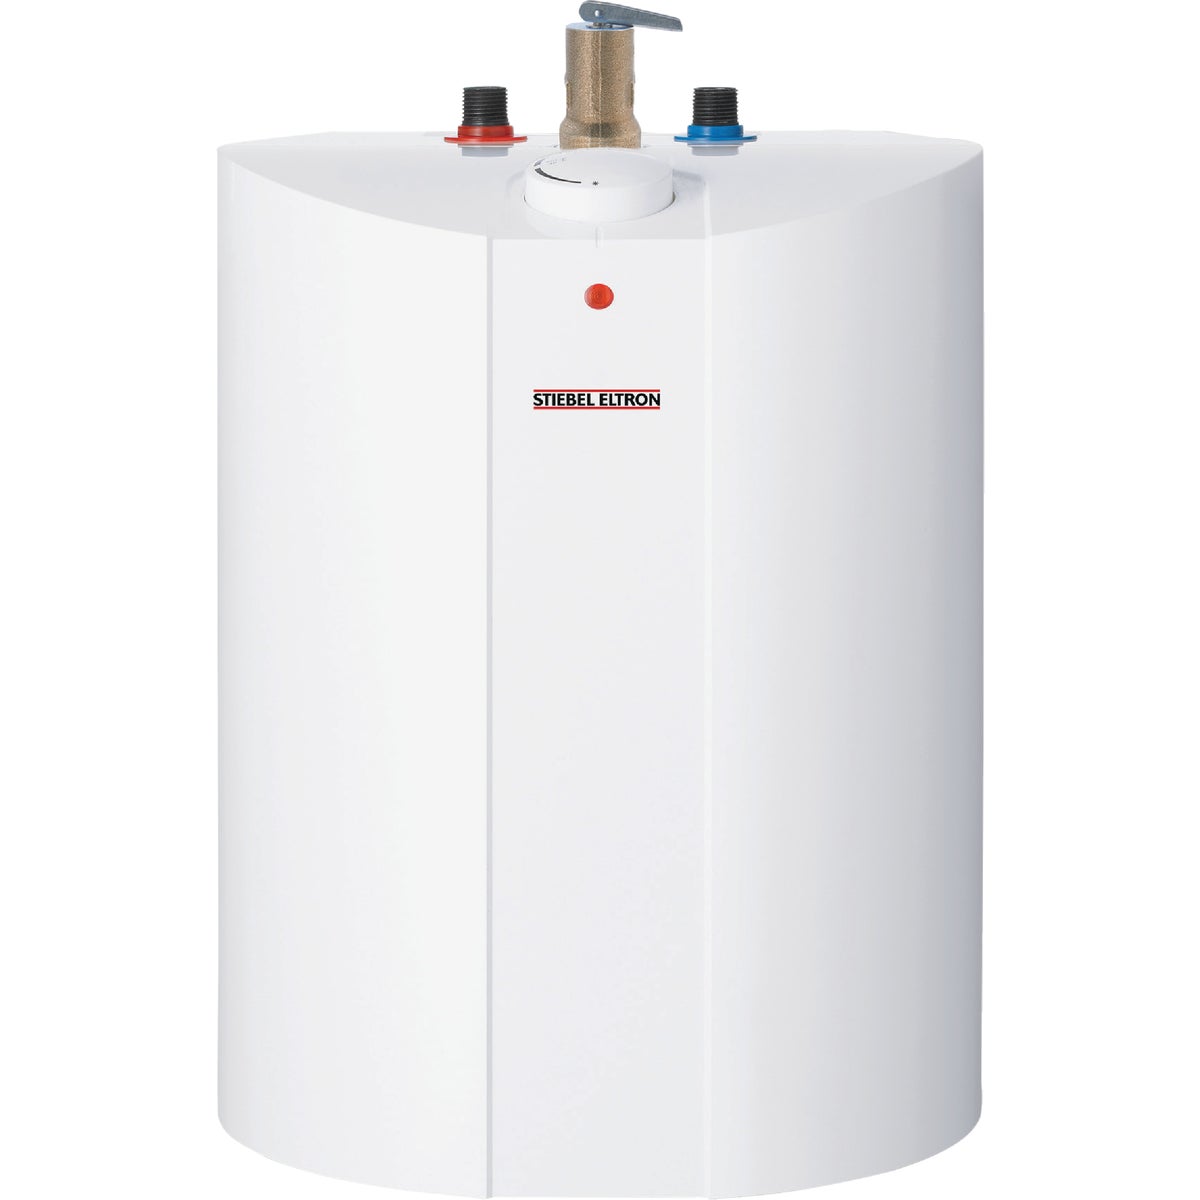 Item 449326, The SHC mini tank 120V (volt) electric water heater frees up precious space